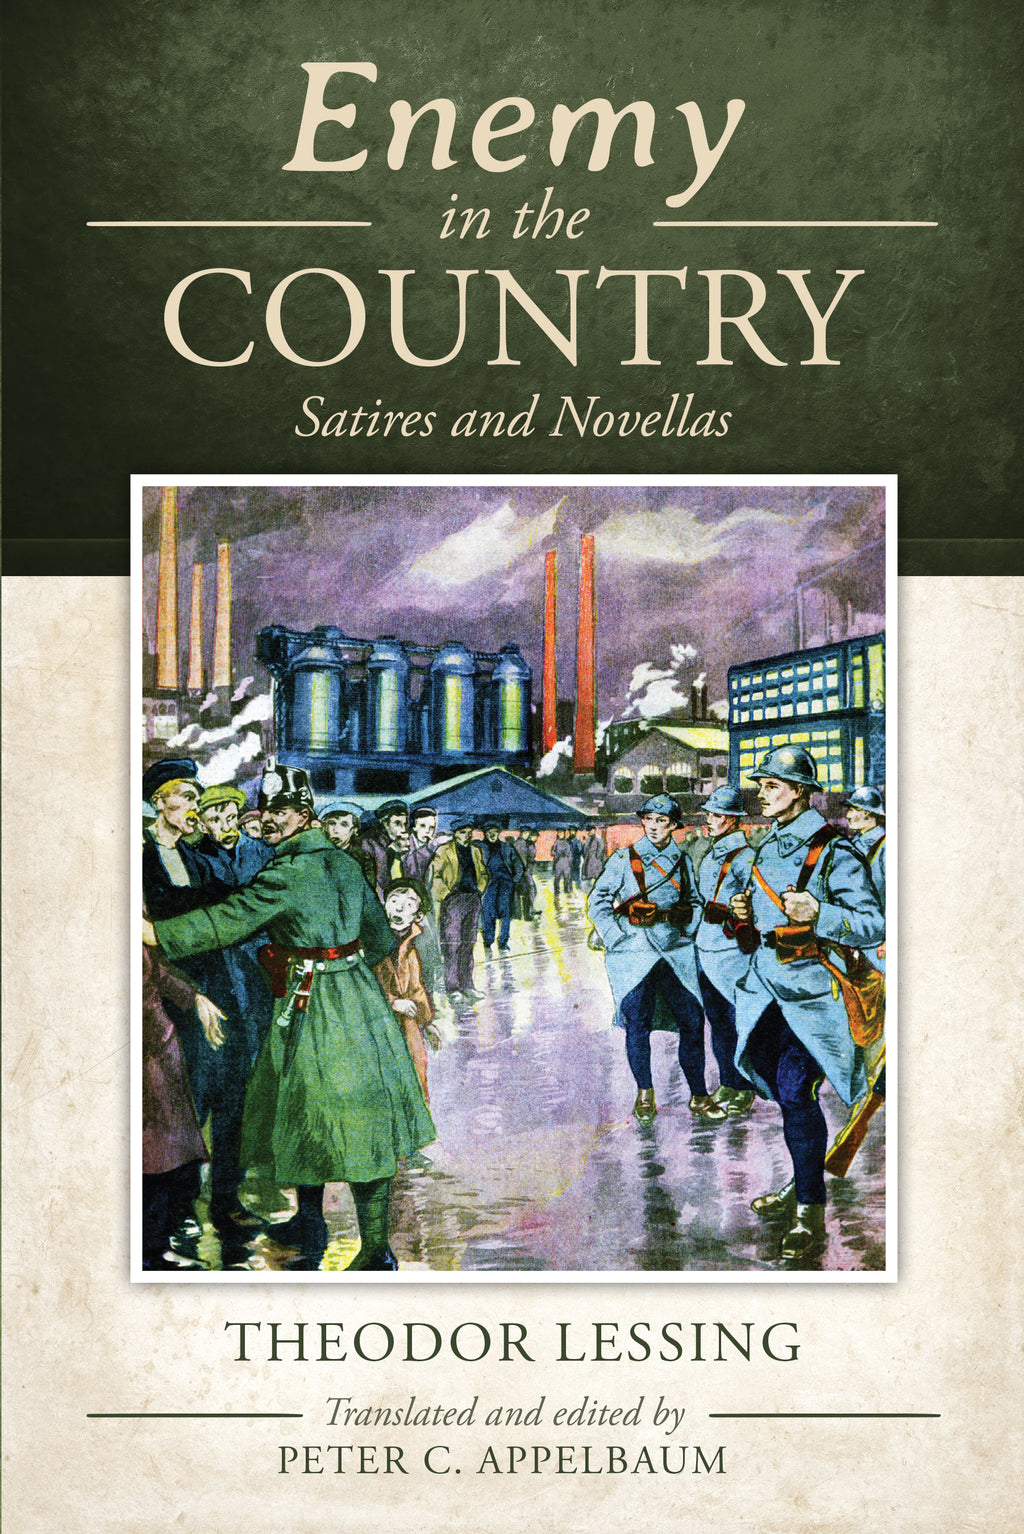 Enemy in the Country: Satires and Novellas